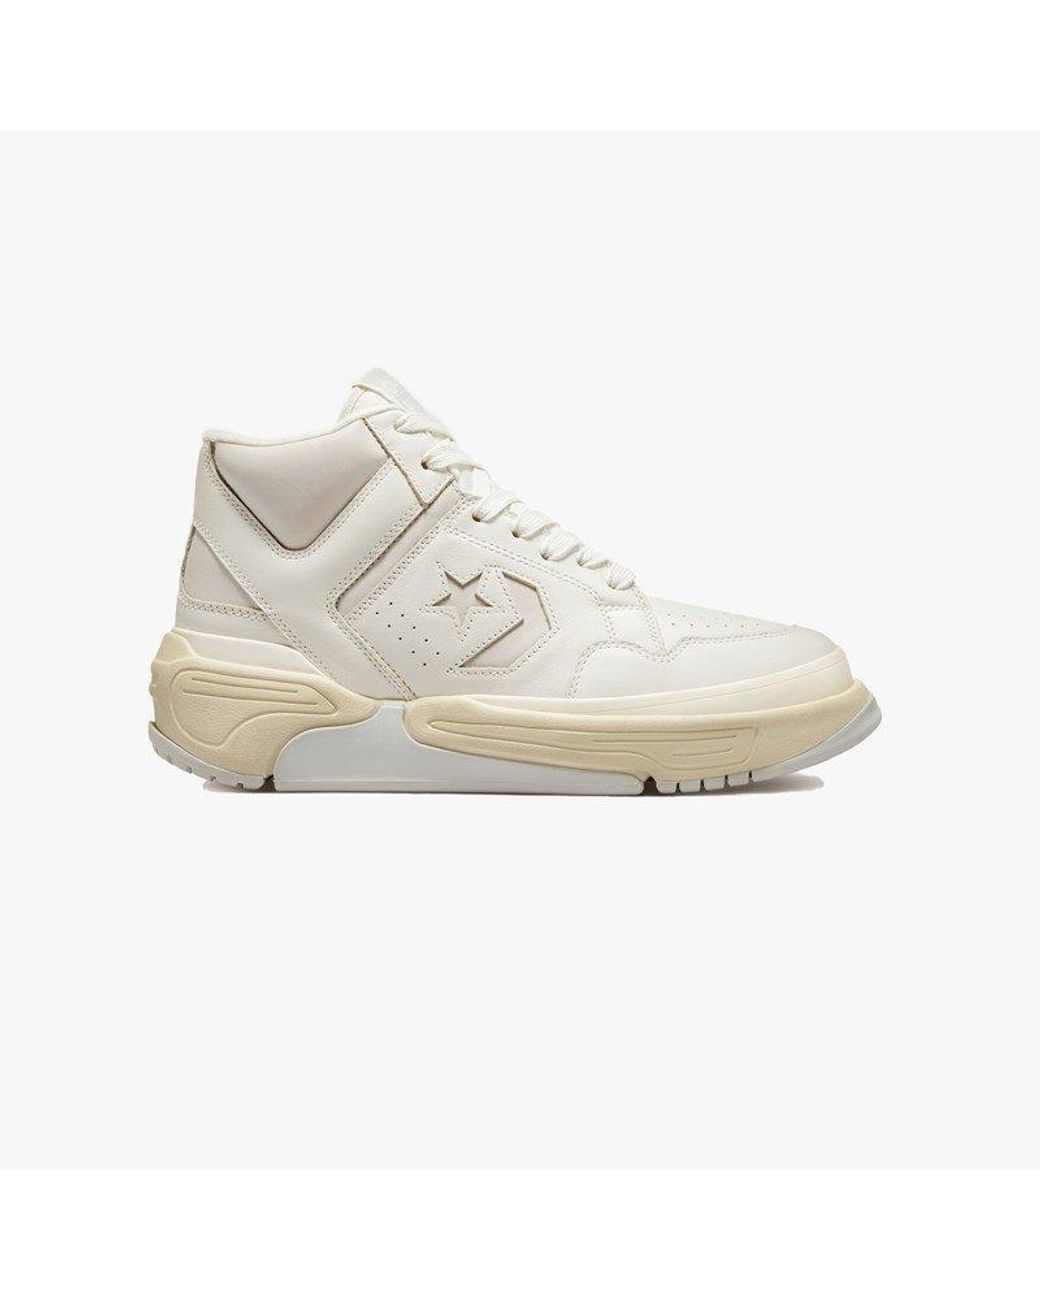 Converse Weapon Cx in White | Lyst